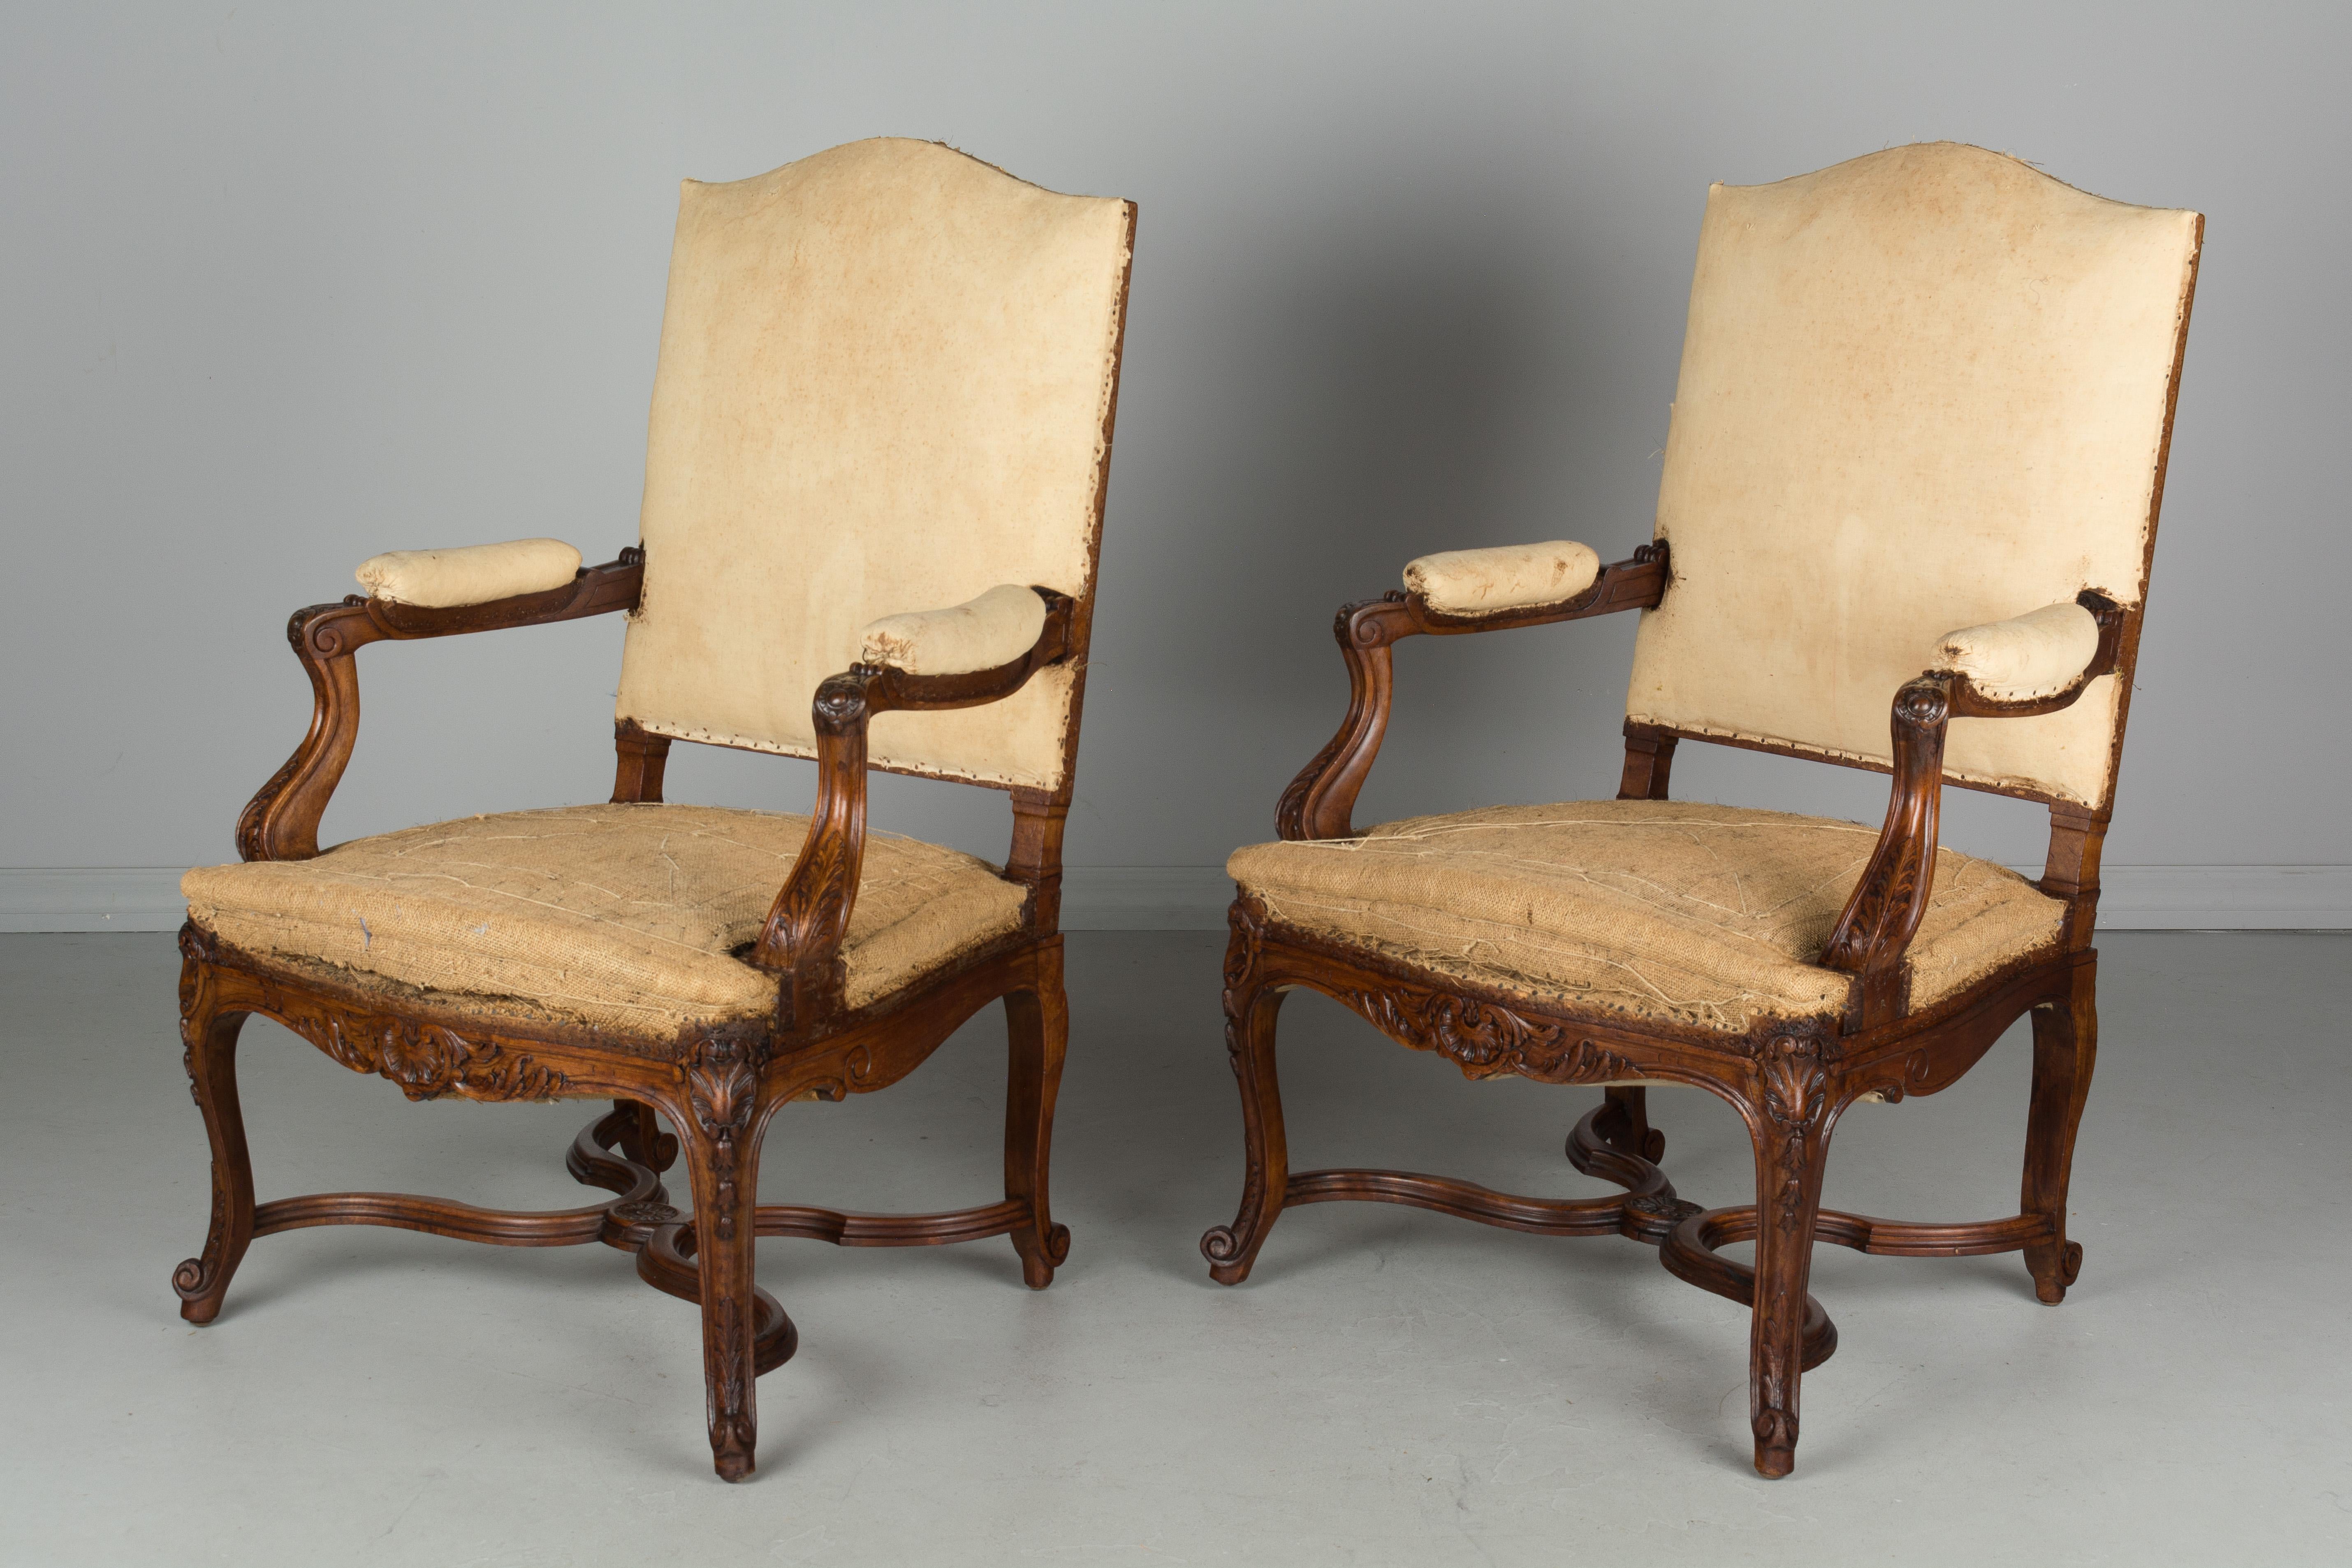 Pair of French Regence style fauteuils, or arm chairs. Hand-carved walnut frames with X-stretcher. Sturdy with comfortable proportions. Stripped of old fabric and sold as is.
  